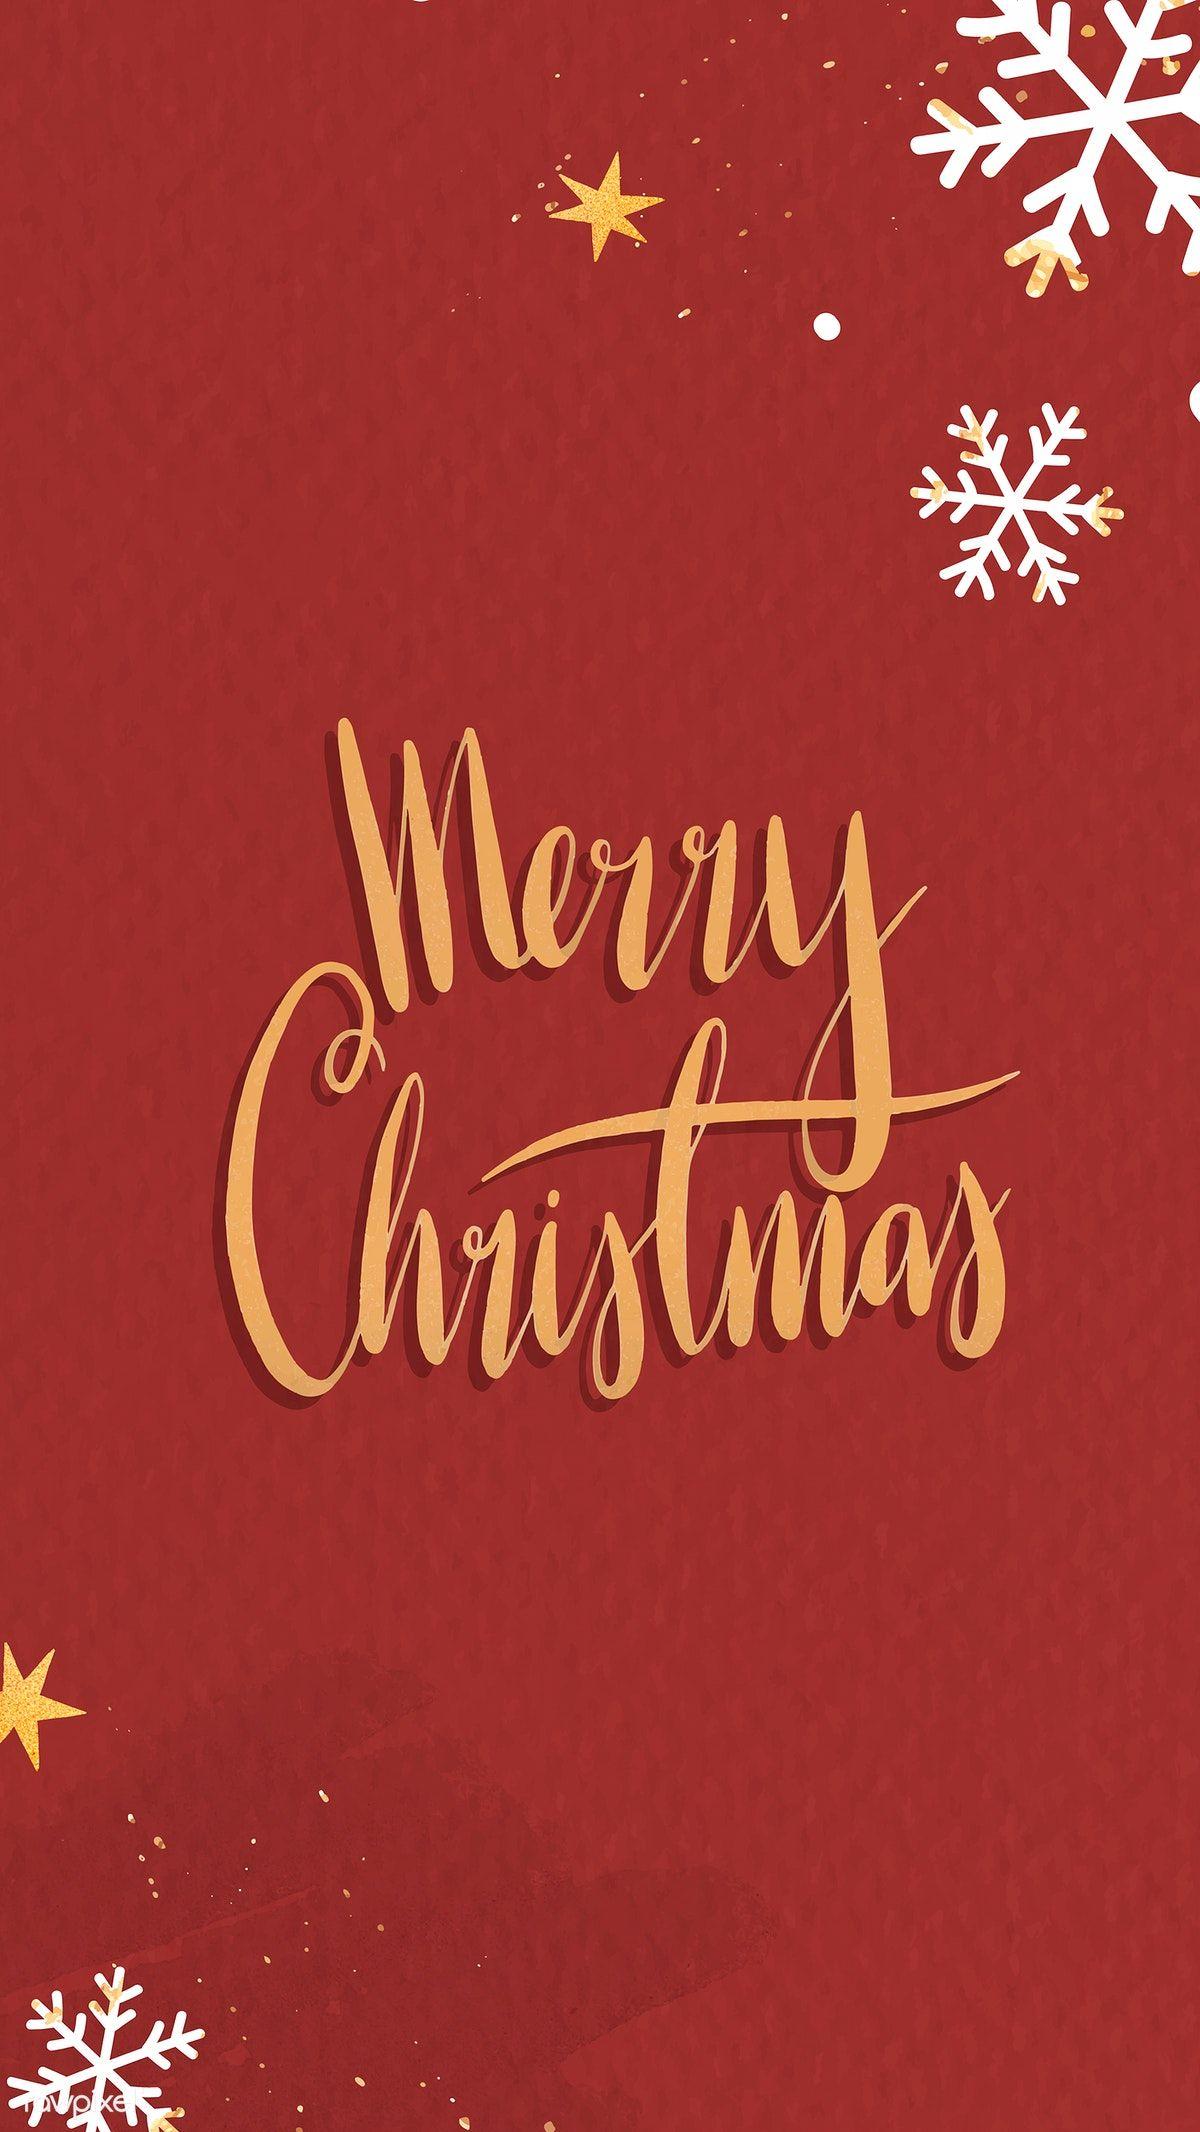 Gold Merry Christmas on red mobile phone wallpaper vector